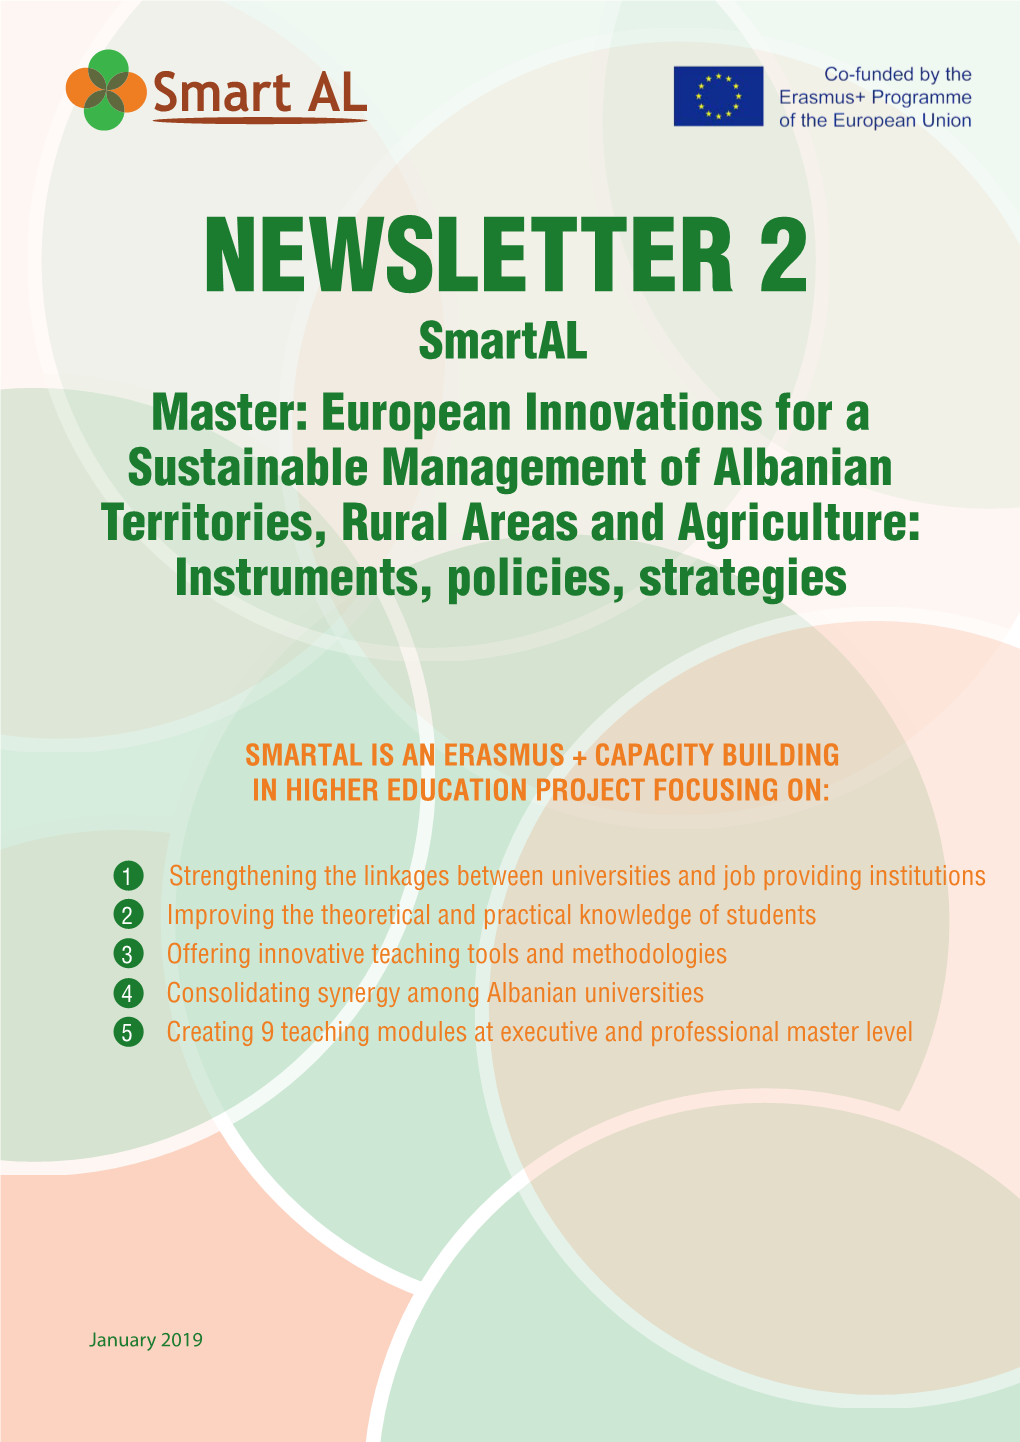 NEWSLETTER 2 Smartal Master: European Innovations for a Sustainable Management of Albanian Territories, Rural Areas and Agriculture: Instruments, Policies, Strategies